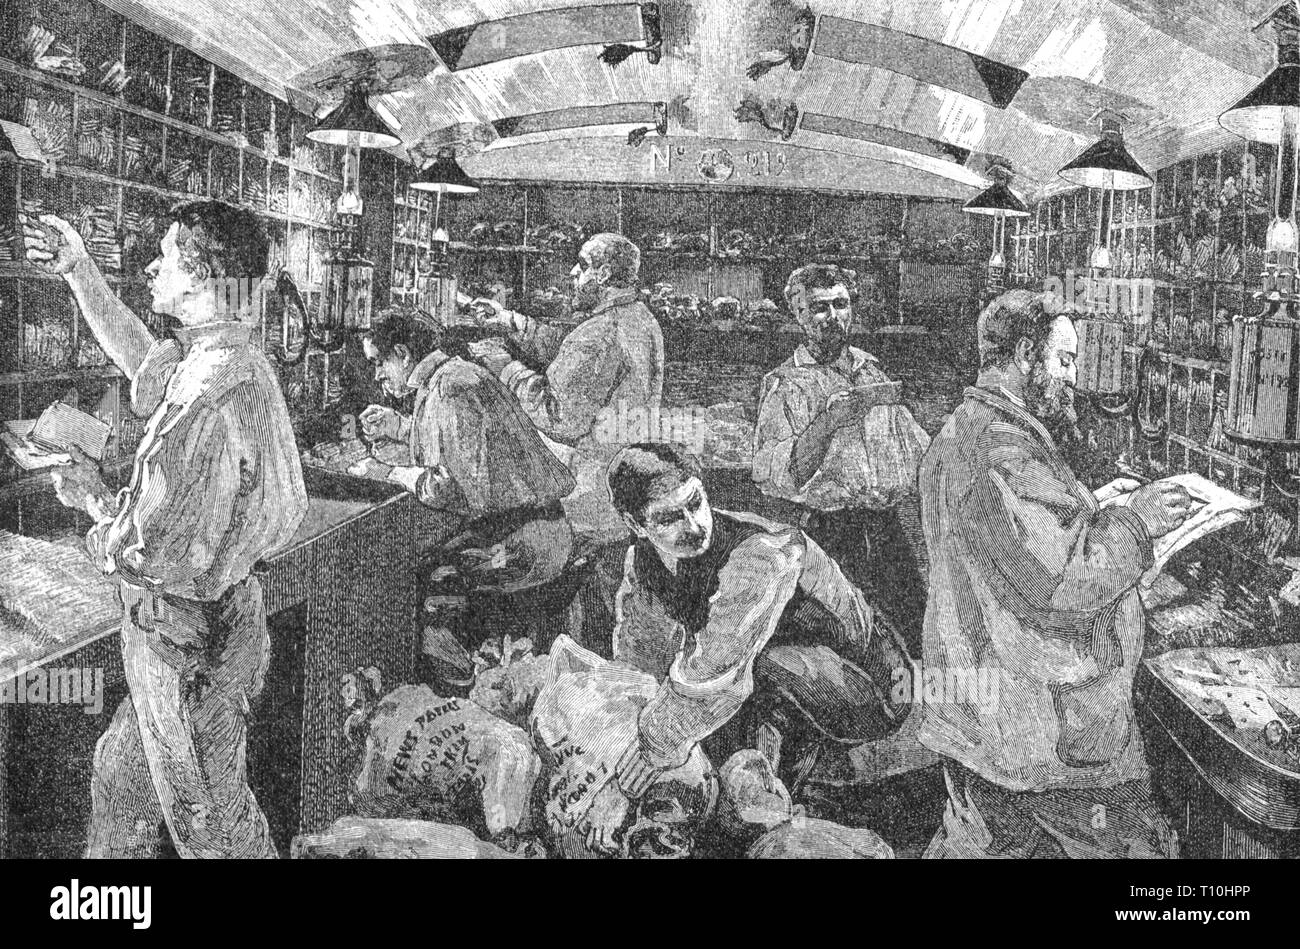 mail, railway, post office a British railroad company in a wagon, interior view, wood engraving, later 19th century, Travelling Post Office, railway wagon, railway carriage, railway carriages, transport, letter, letters, sorting, sort, assort, assorting, at the office, labour, labor, working, work, people, everyday life, daily routine, profession, professions, employees, officer, public employee, men, man, Great Britain, United Kingdom, Victorian era, mail, post, railway, railroad, railways, railroads, post office, post offices, railroad company, railw, Artist's Copyright has not to be cleared Stock Photo